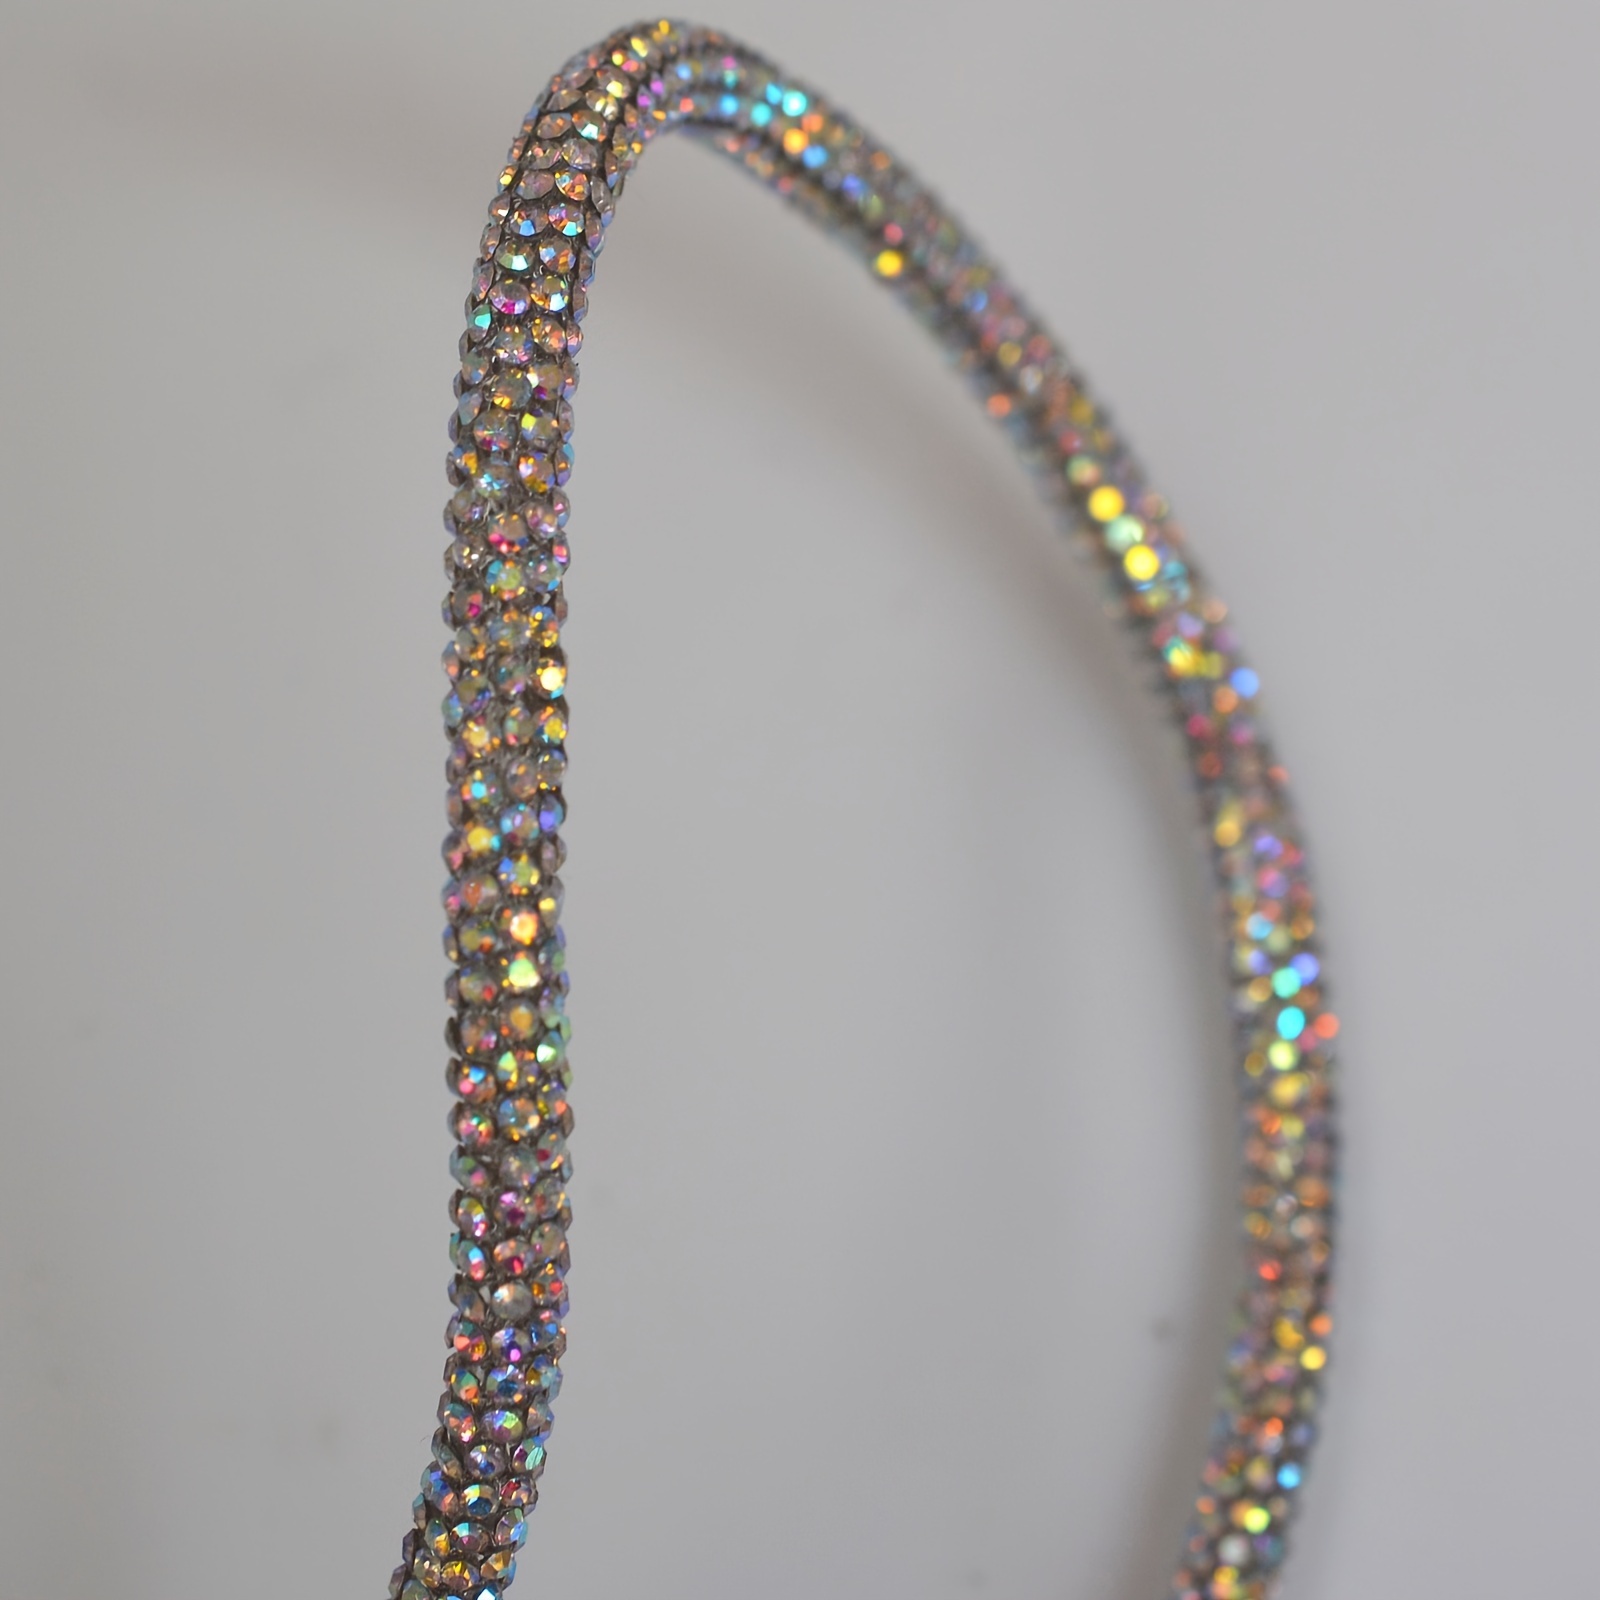 1pc, Crystal Cord (36 inch), 6mm Trimming Glitter Rhinestone Soft Tube, Shoelace Glitter Round Rope